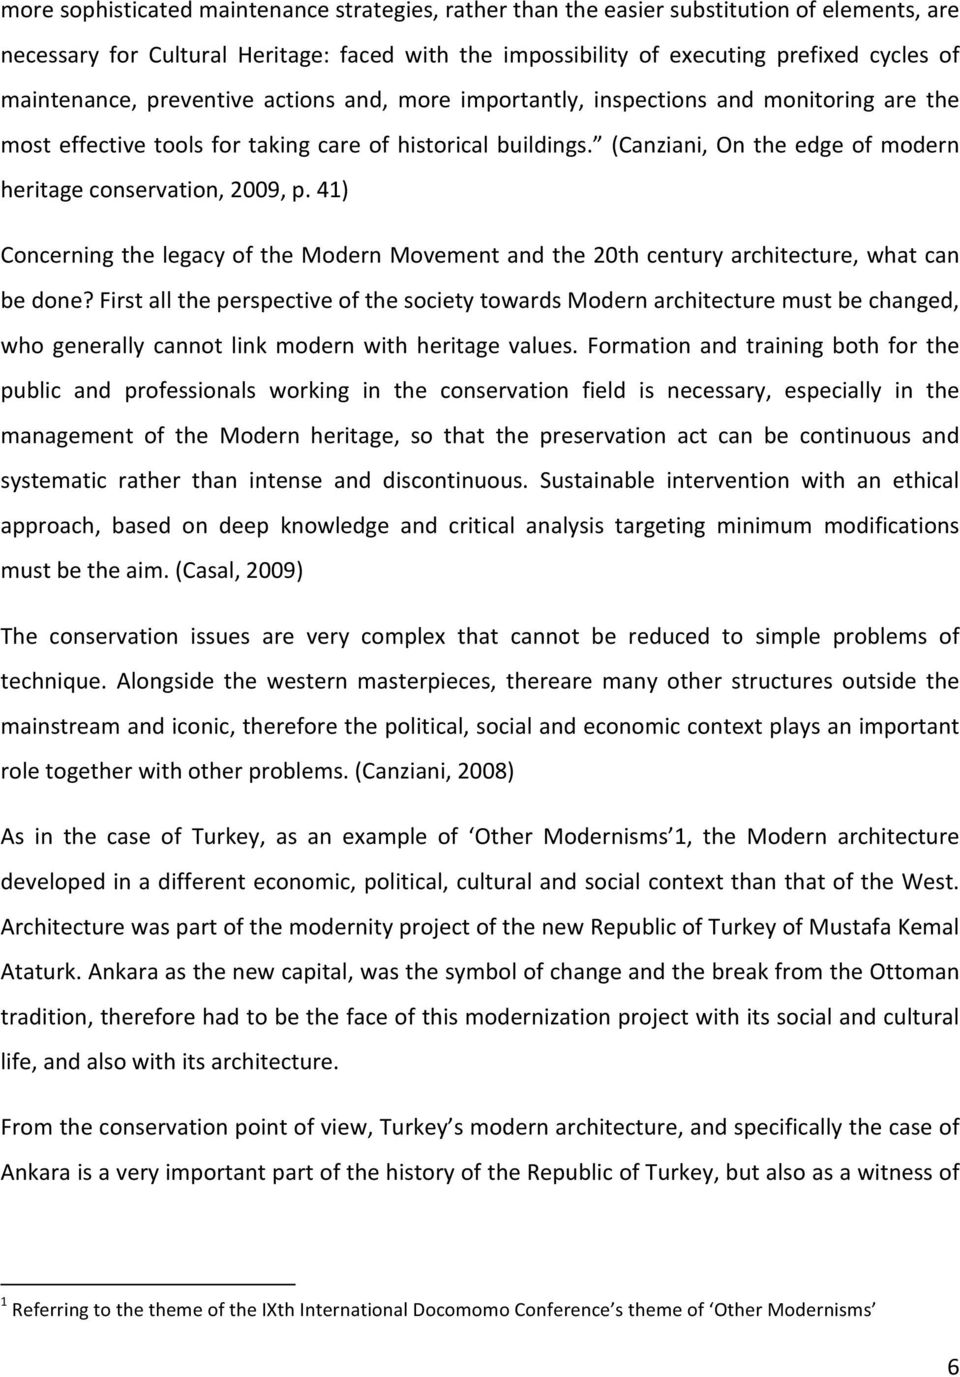 (Canziani, On the edge of modern heritage conservation, 2009, p. 41) Concerning the legacy of the Modern Movement and the 20th century architecture, what can be done?